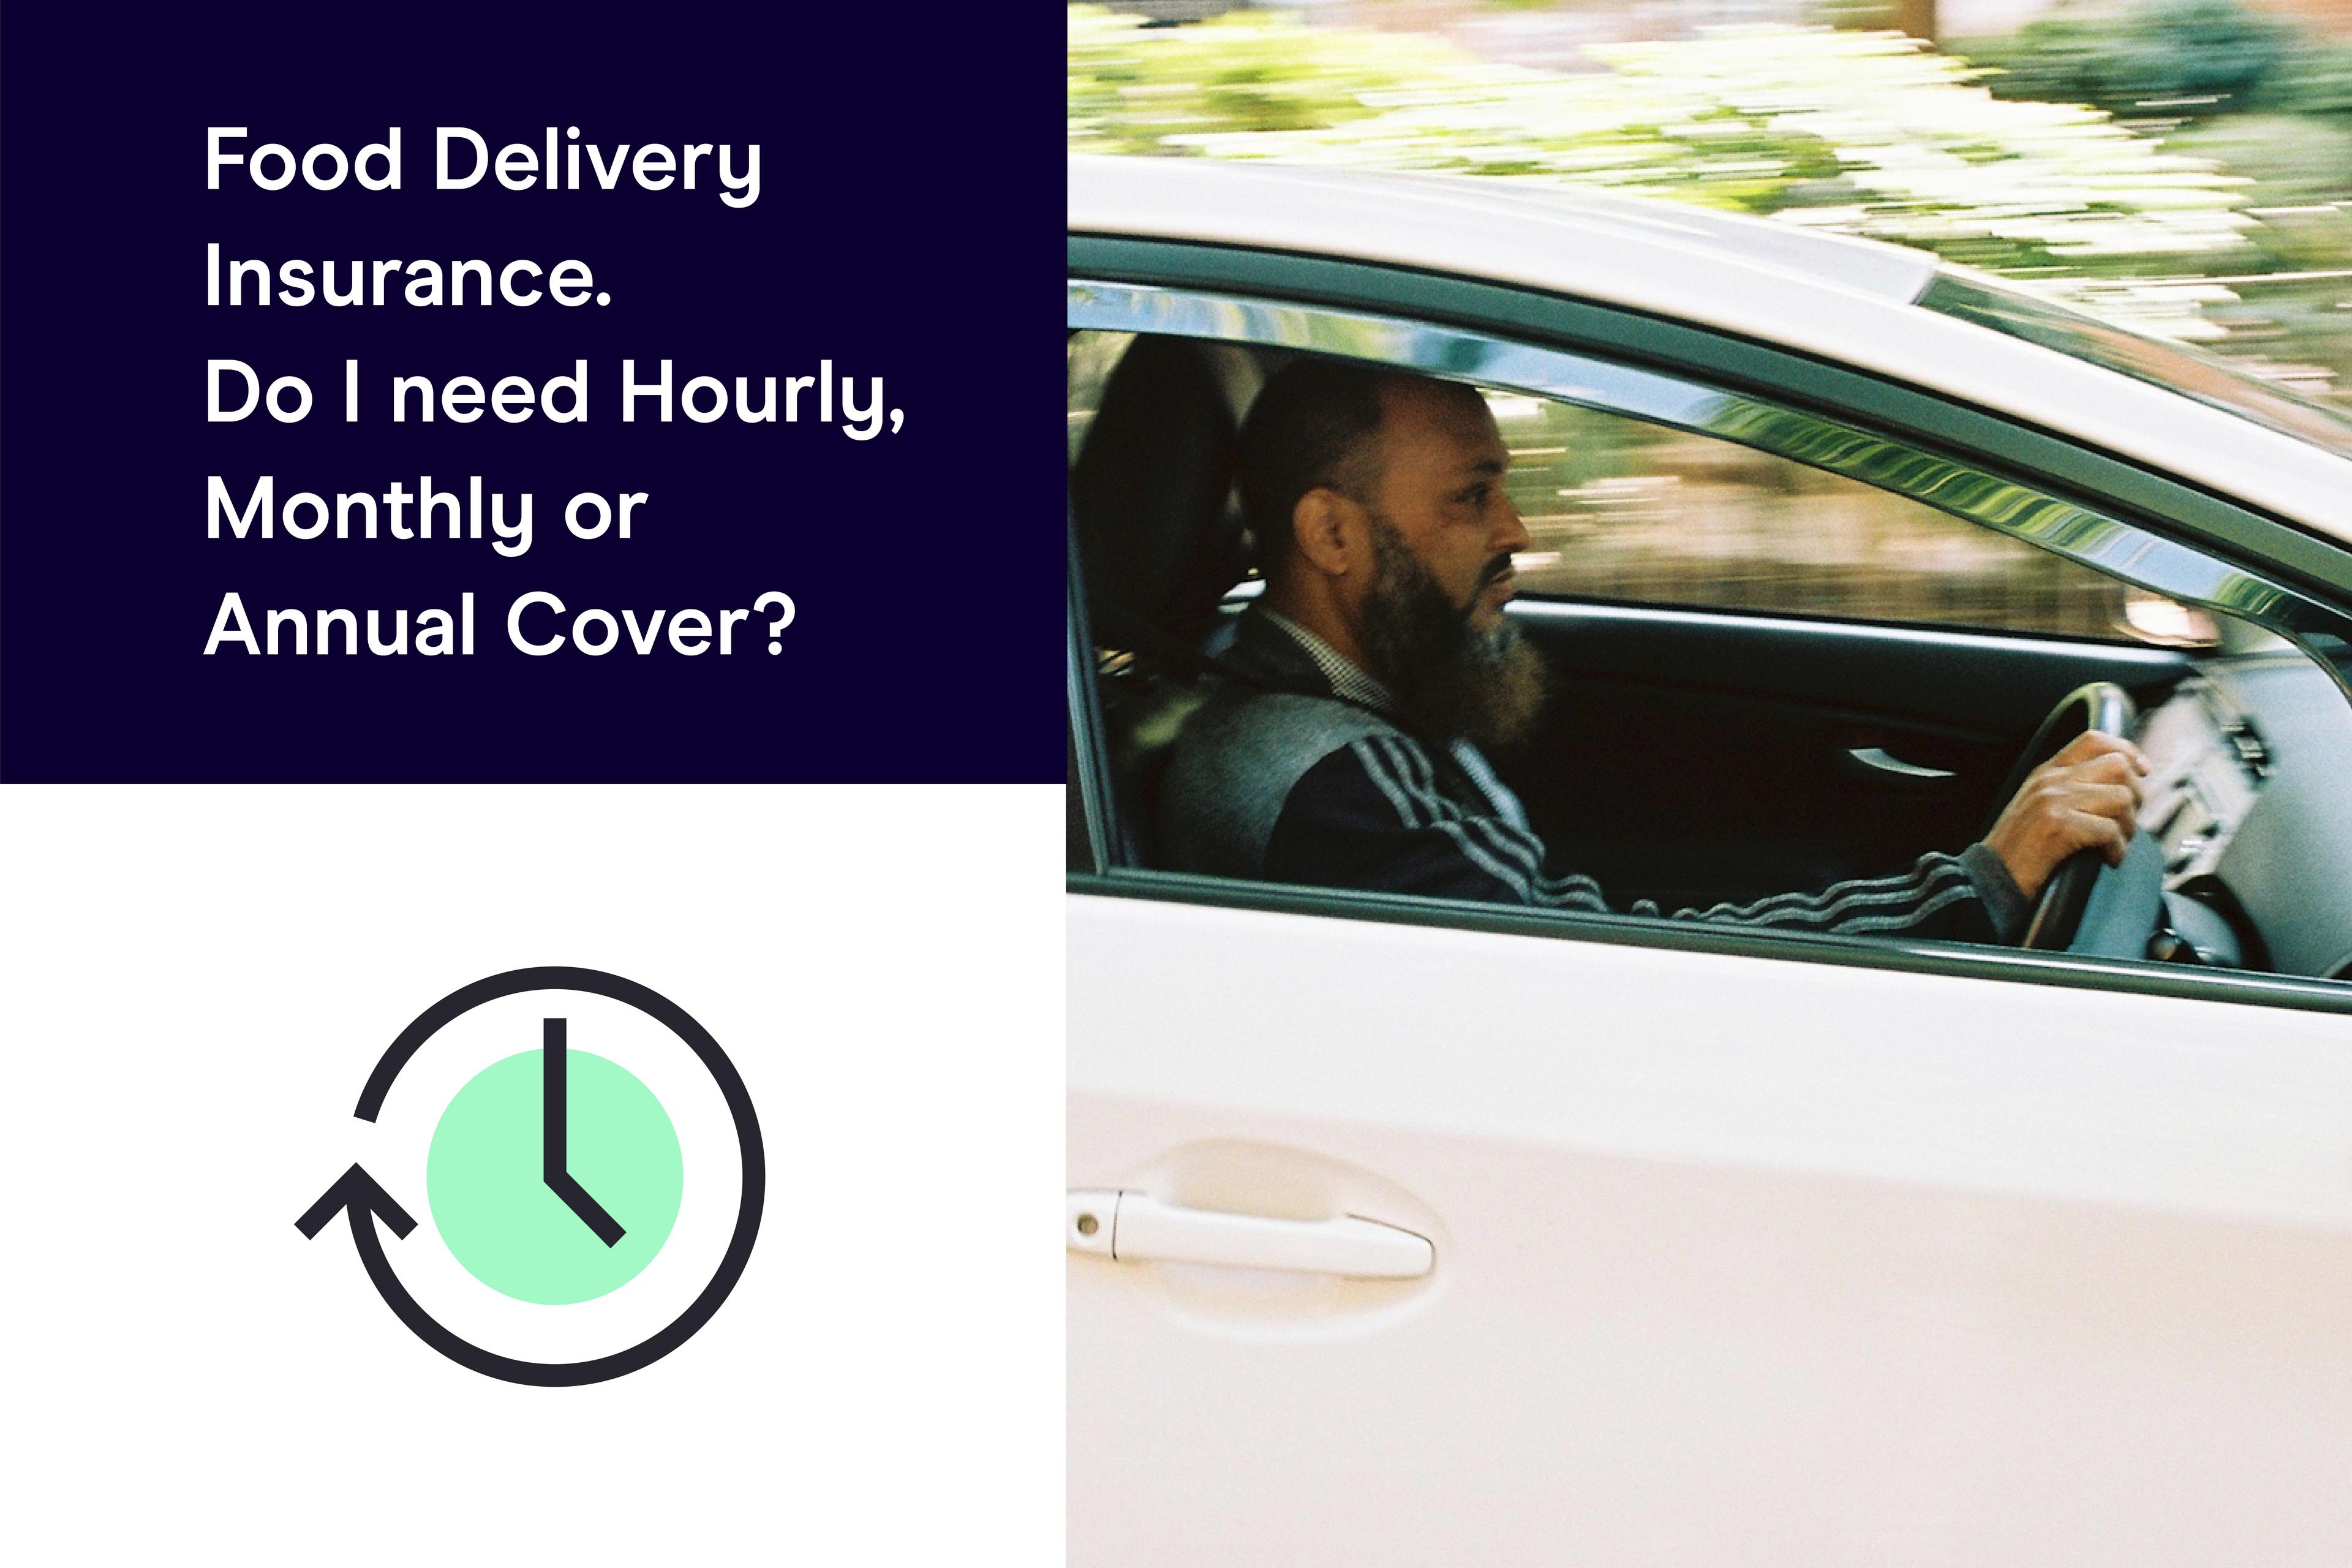 Food Delivery Insurance. Do I Need Hourly, Monthly, or Annual Cover?   